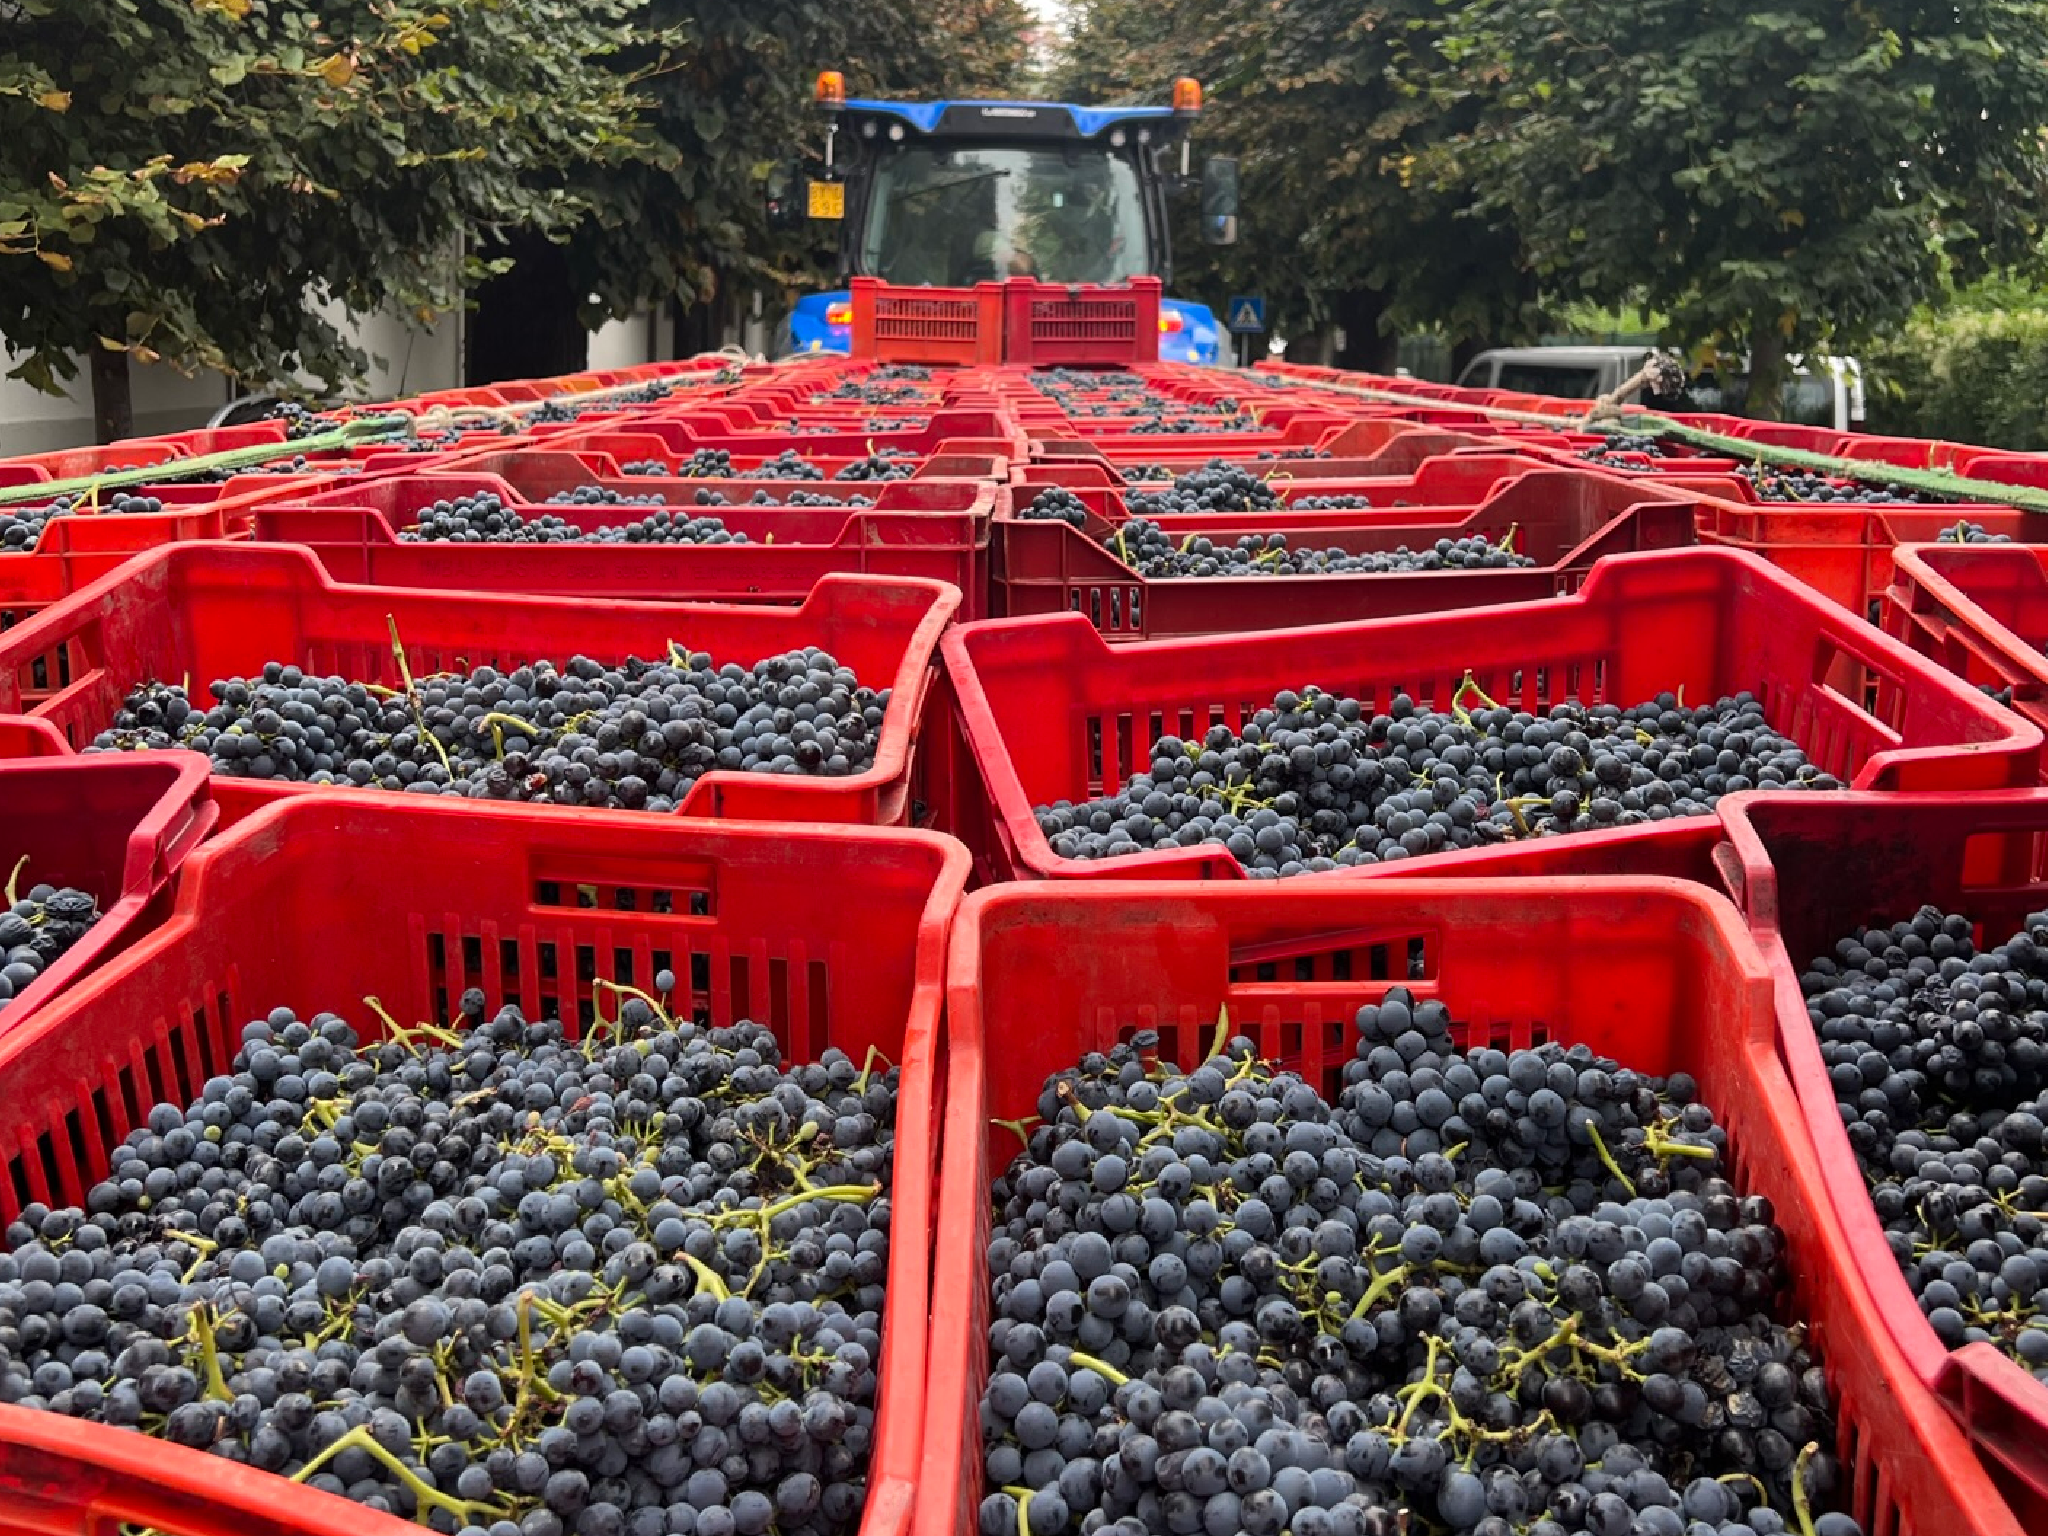 <p>Tractors piled high with grapes are a common sight in autumn </p>